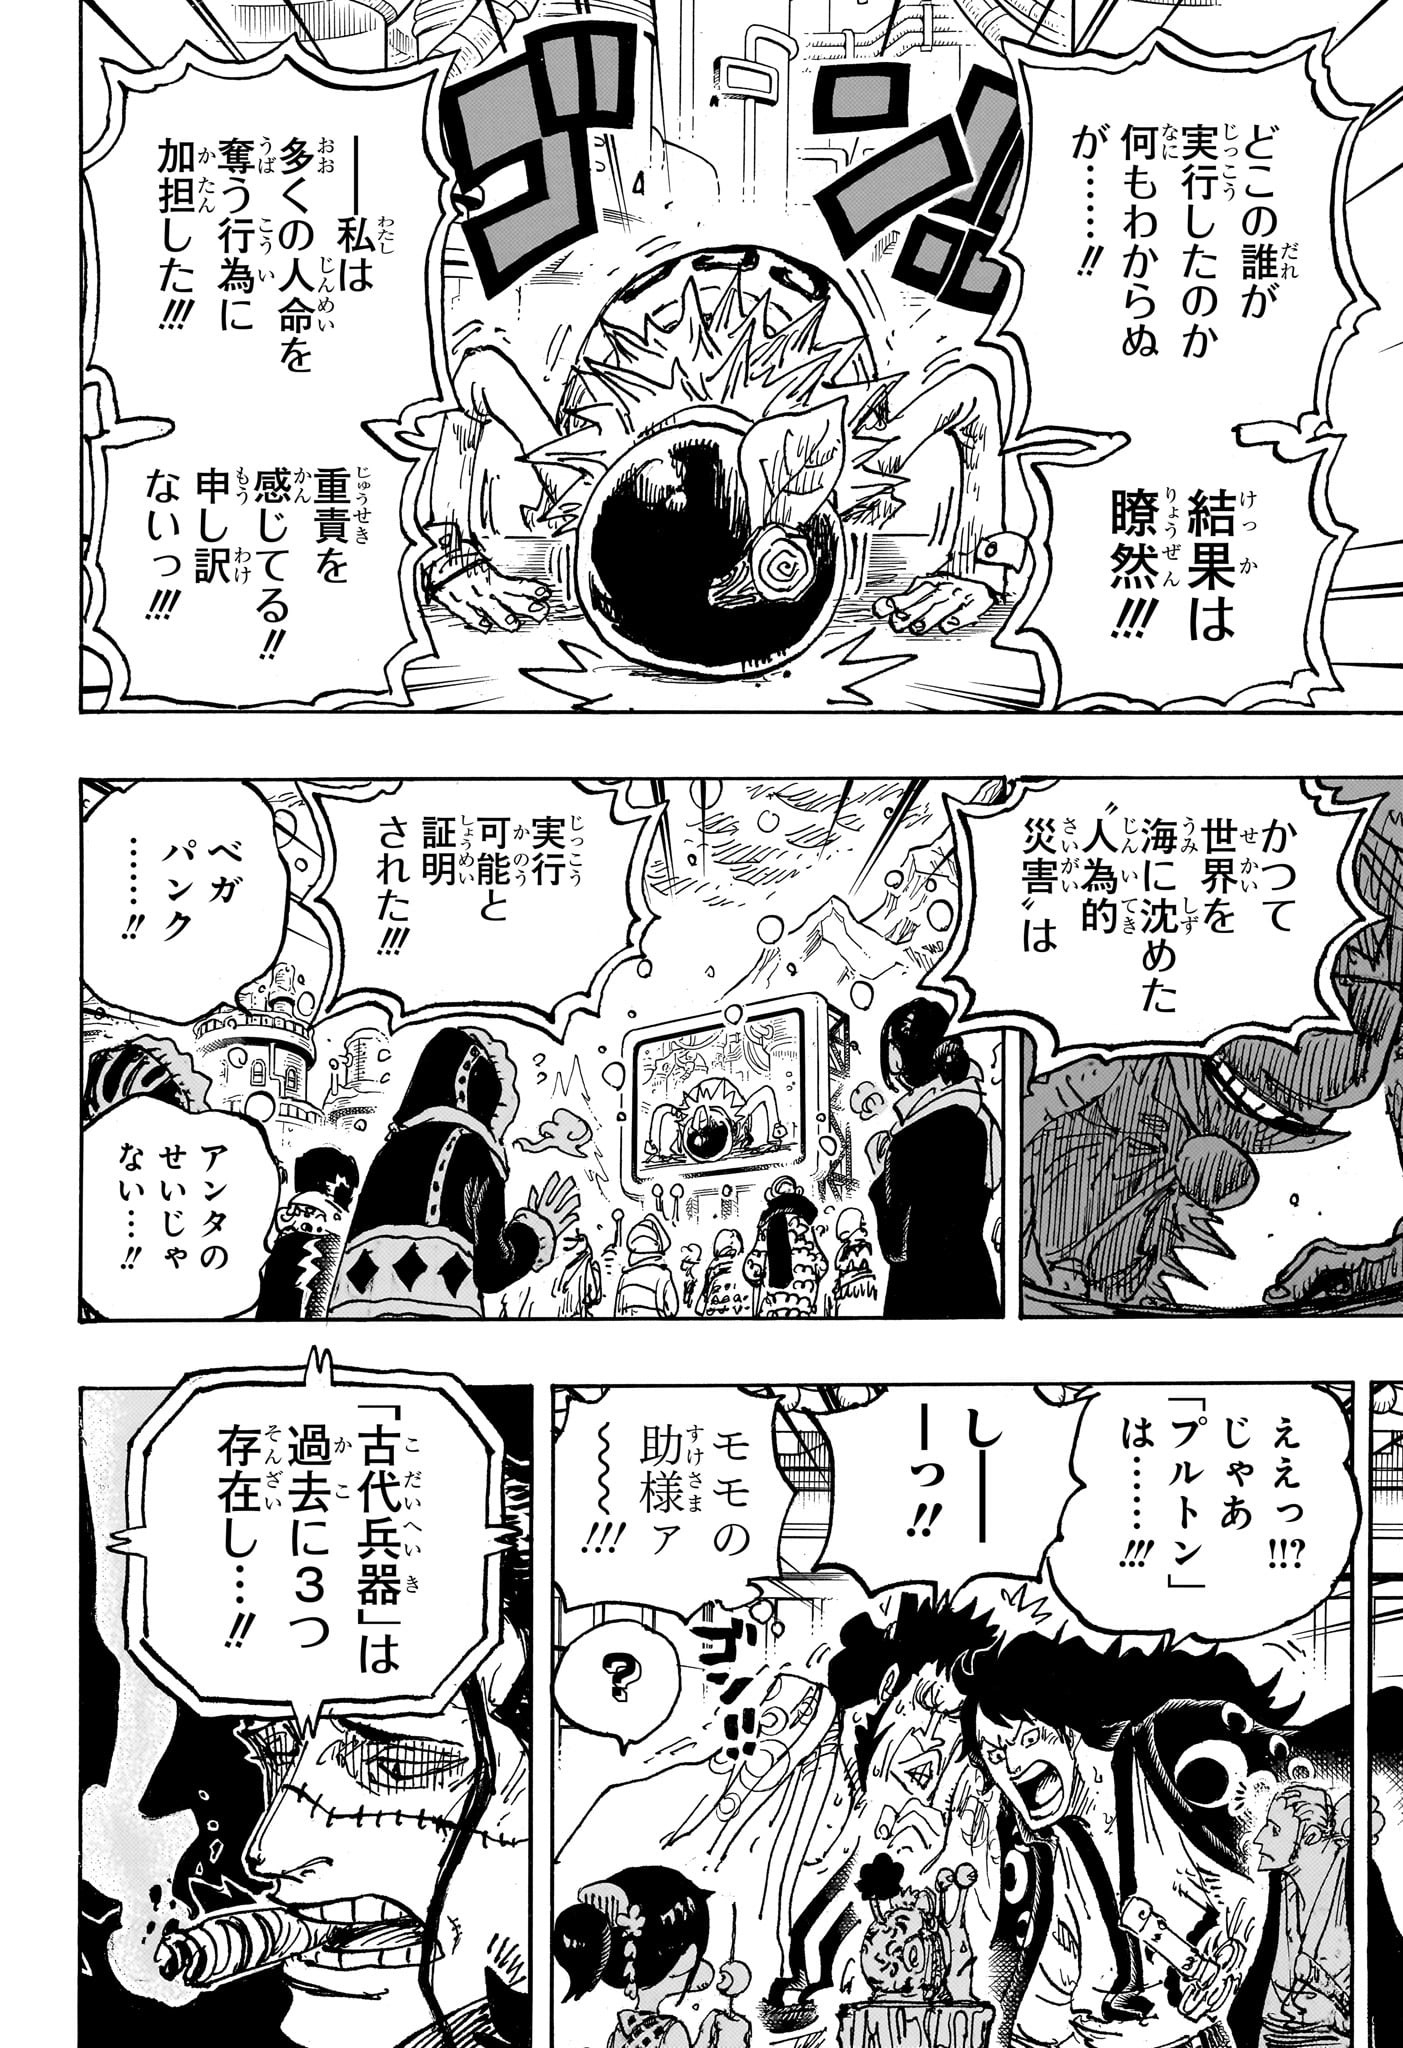 One Piece - Chapter 1116 - Page 8